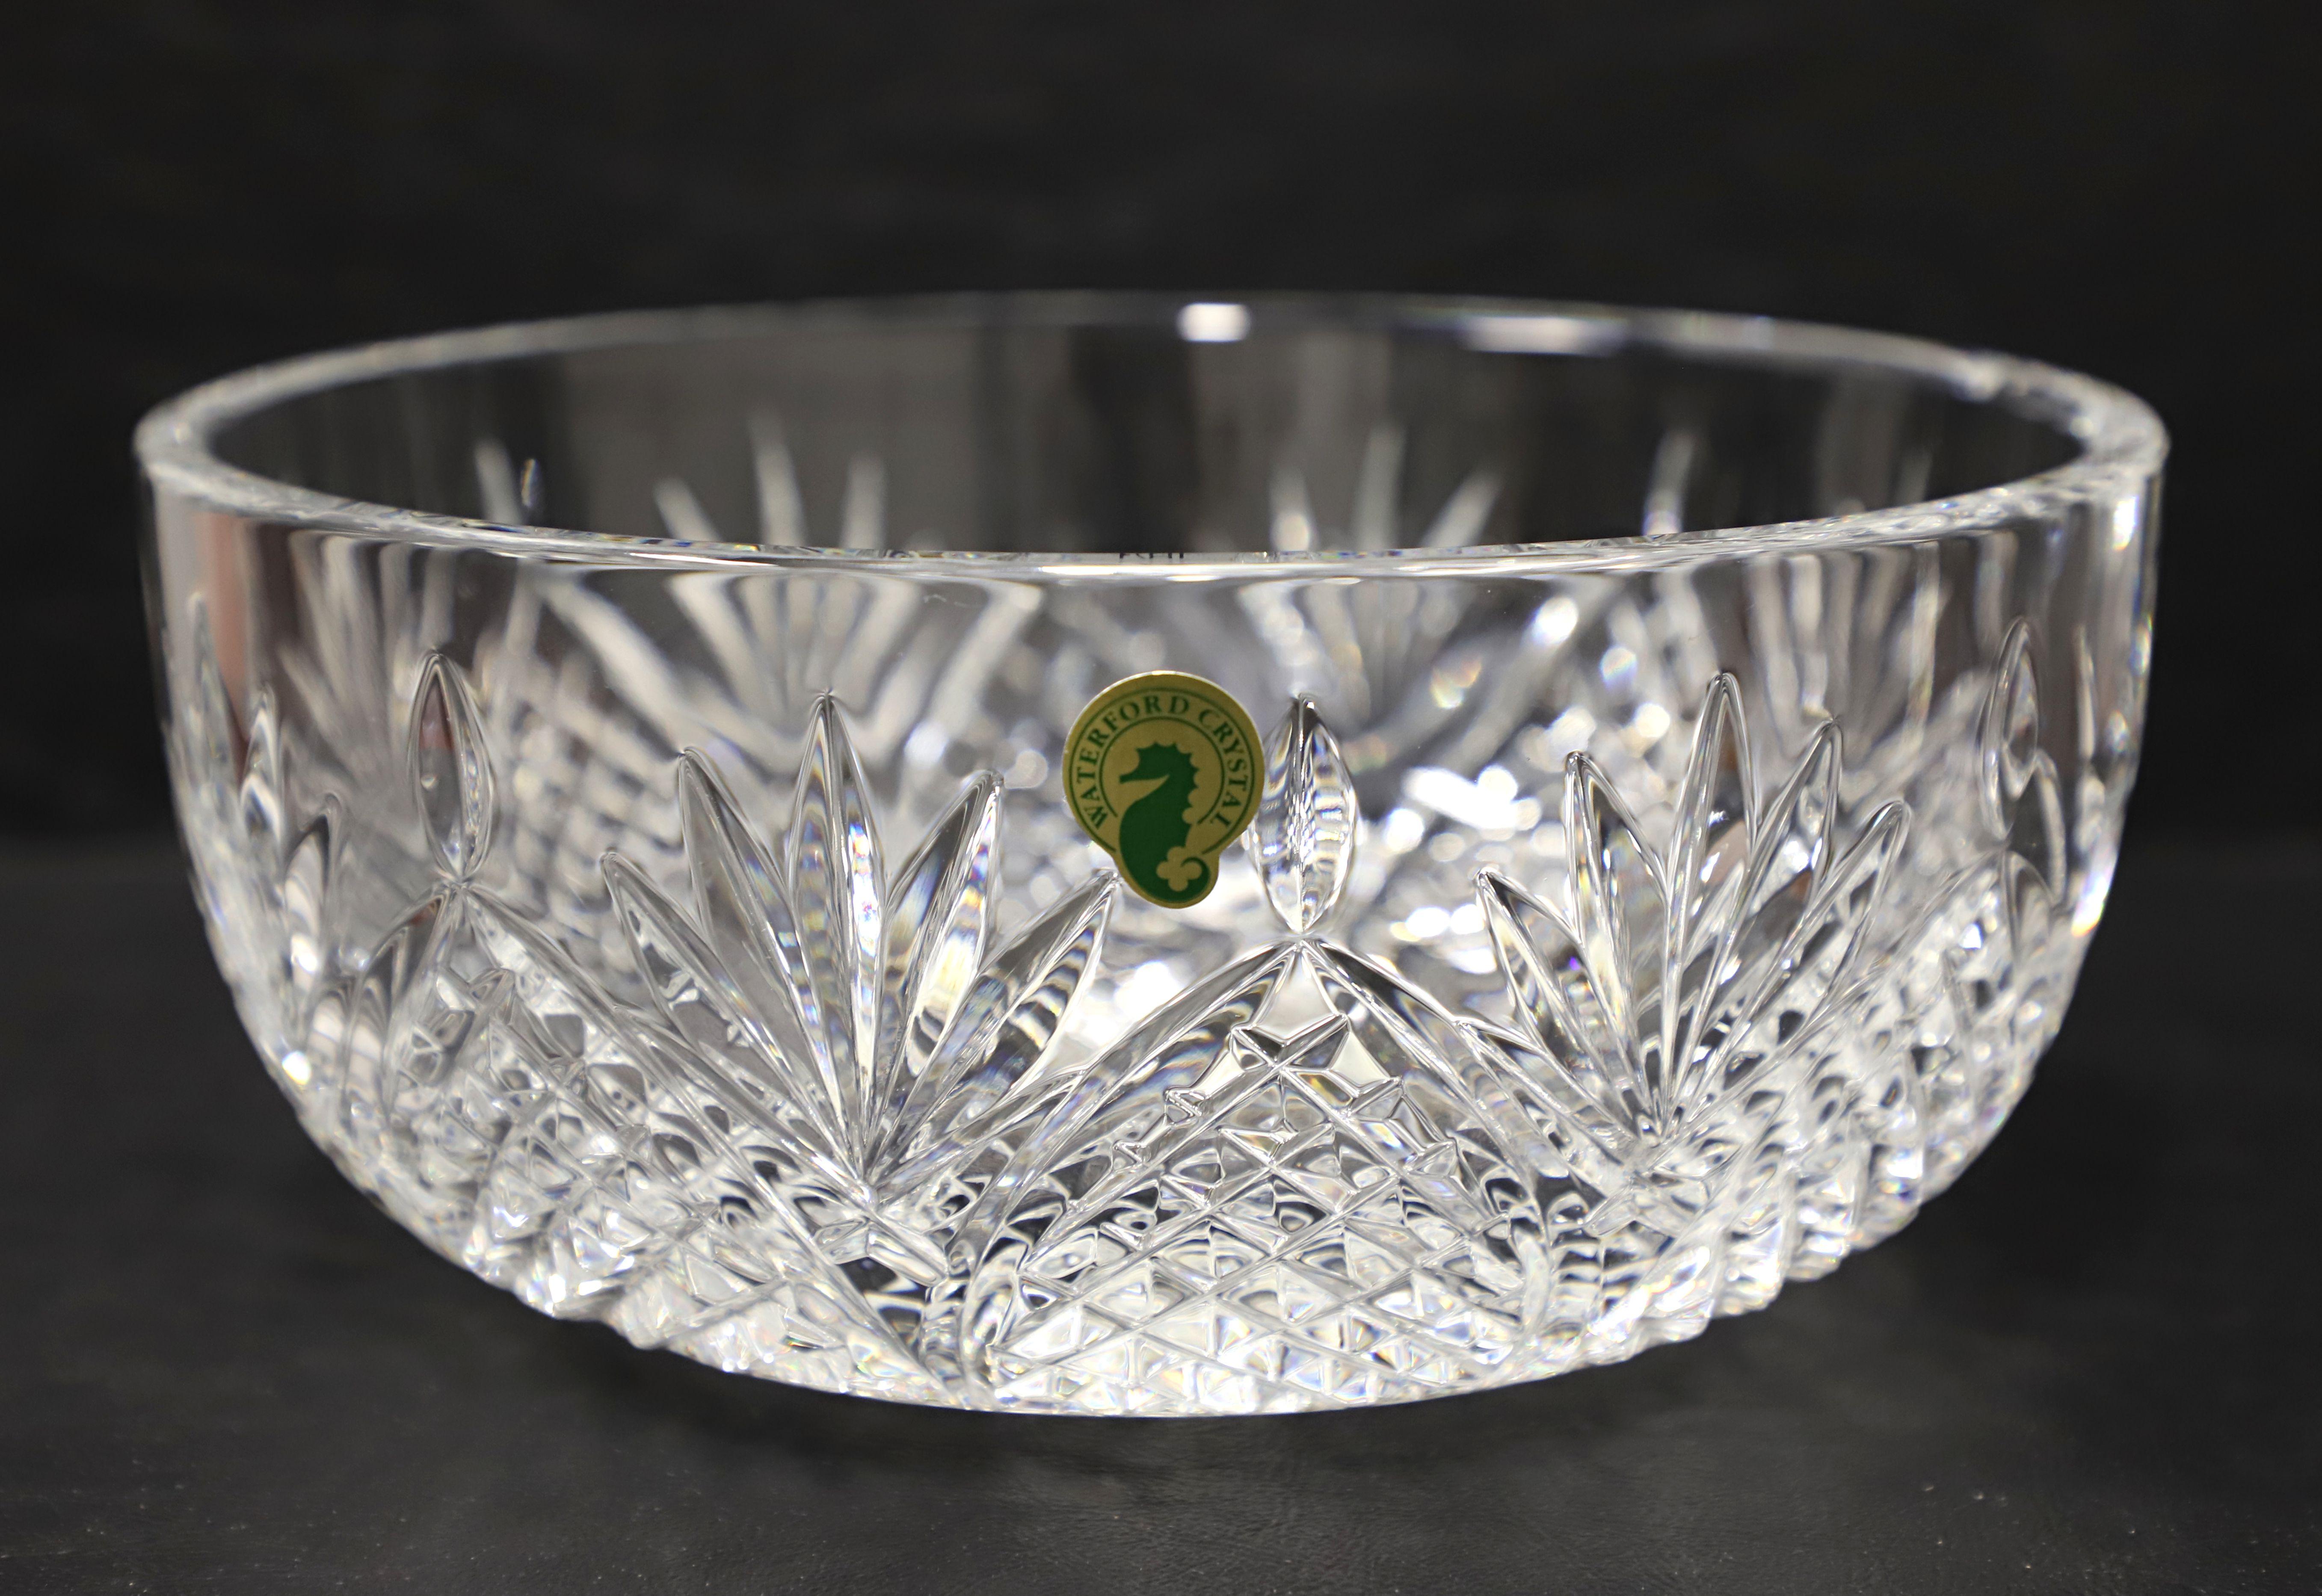 An Early 21st Century centerpiece bowl by Waterford, their 